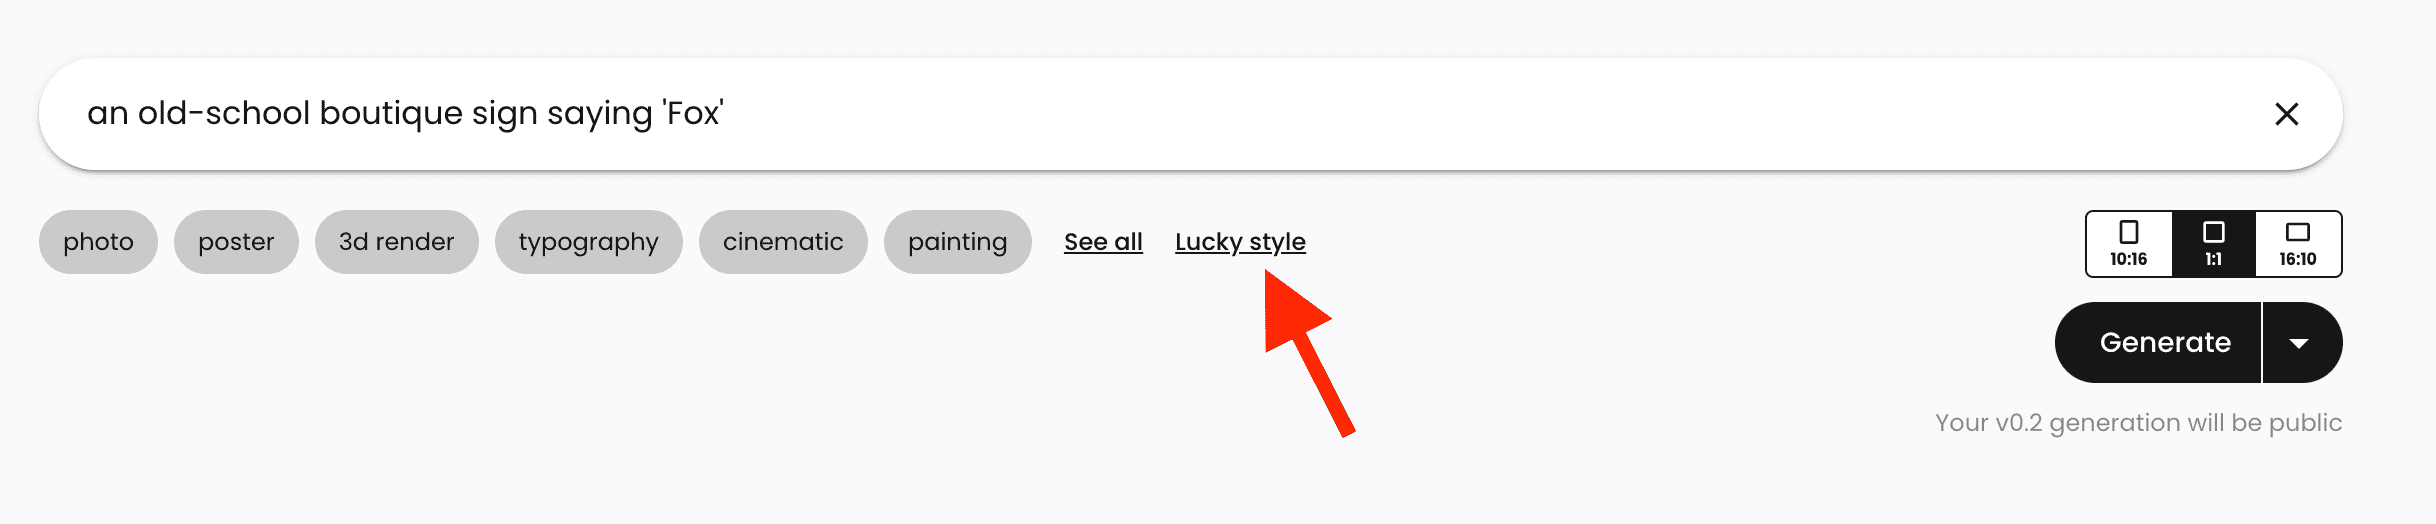 click on the ‘Lucky style’ button to let Ideogram select three styles for you randomly.